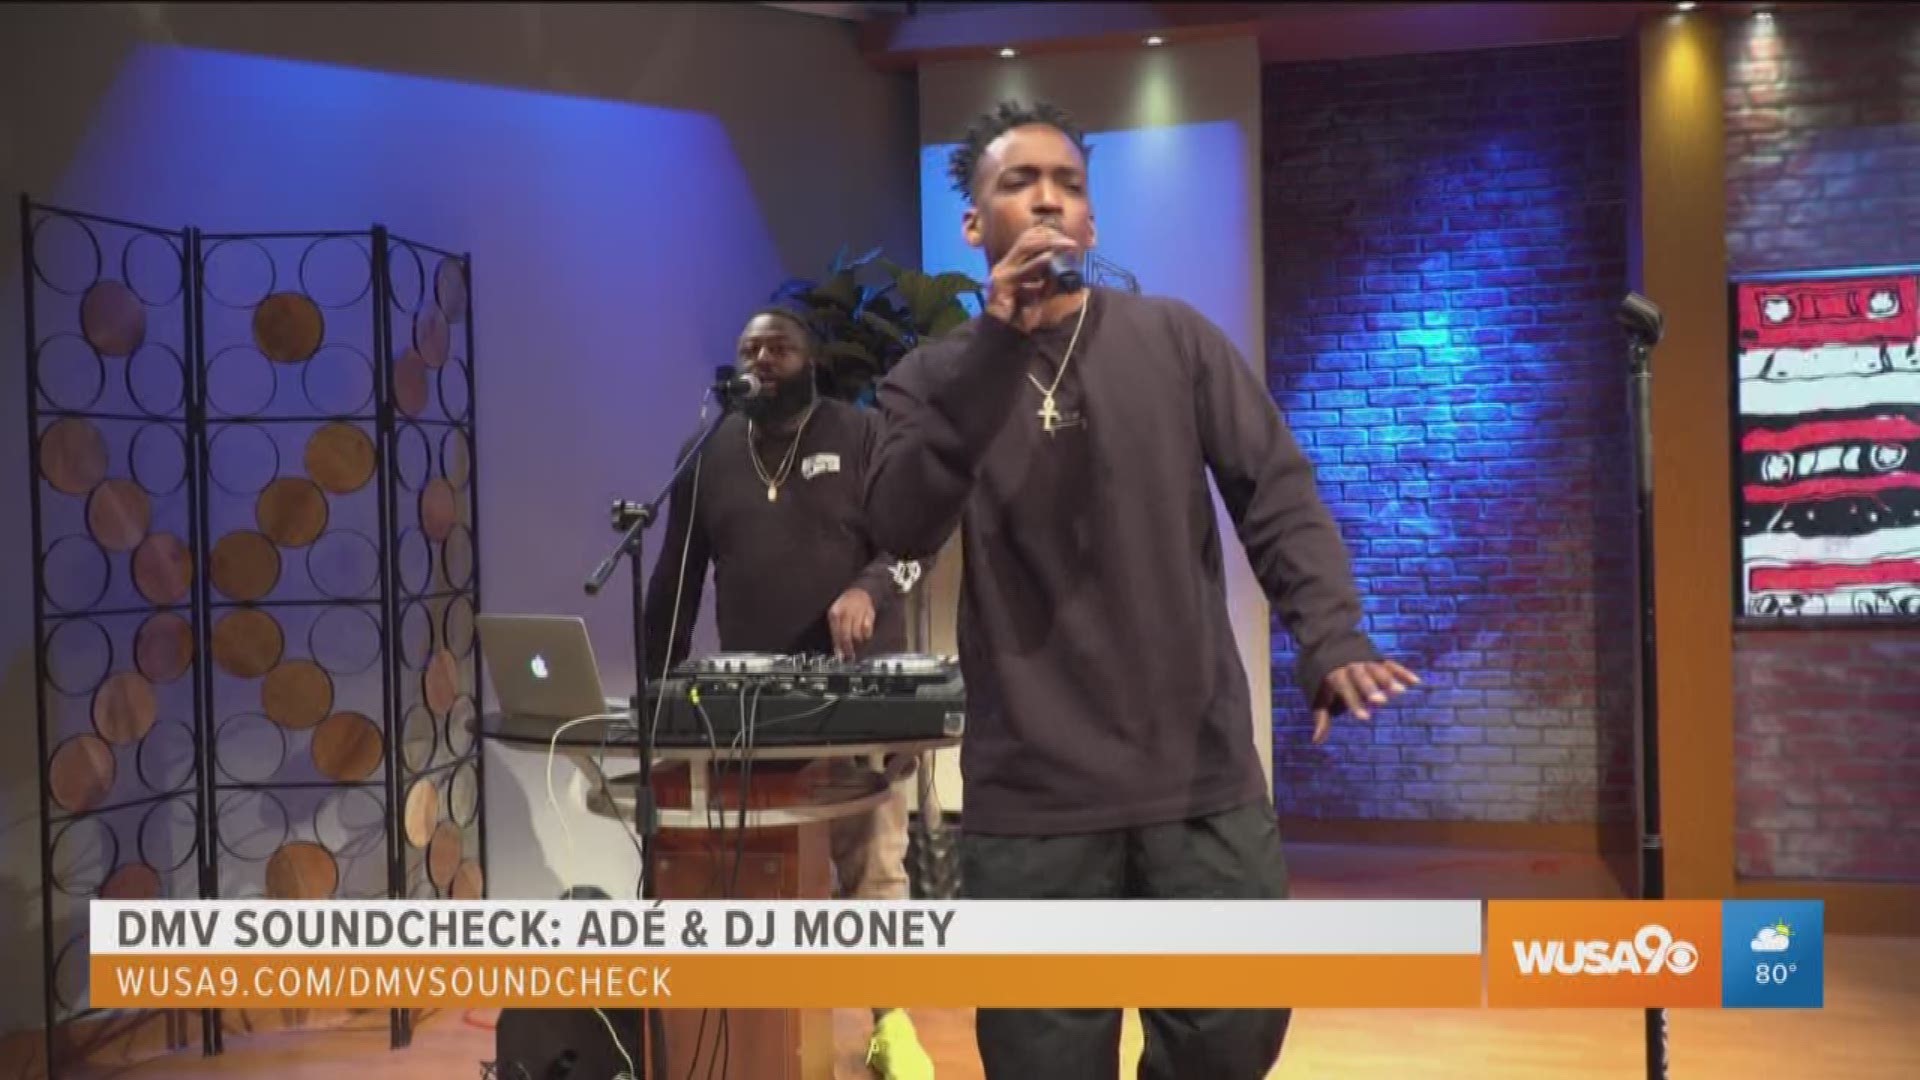 This week on the DMV Soundcheck, rapper Adé and DJ Money performed their song "Something Sweet". Keep an eye out on the duo who have performances lined up in August. For more details on this performance and other DMV Soundcheck artists, go to wusa9.com/dmvsoundcheck.